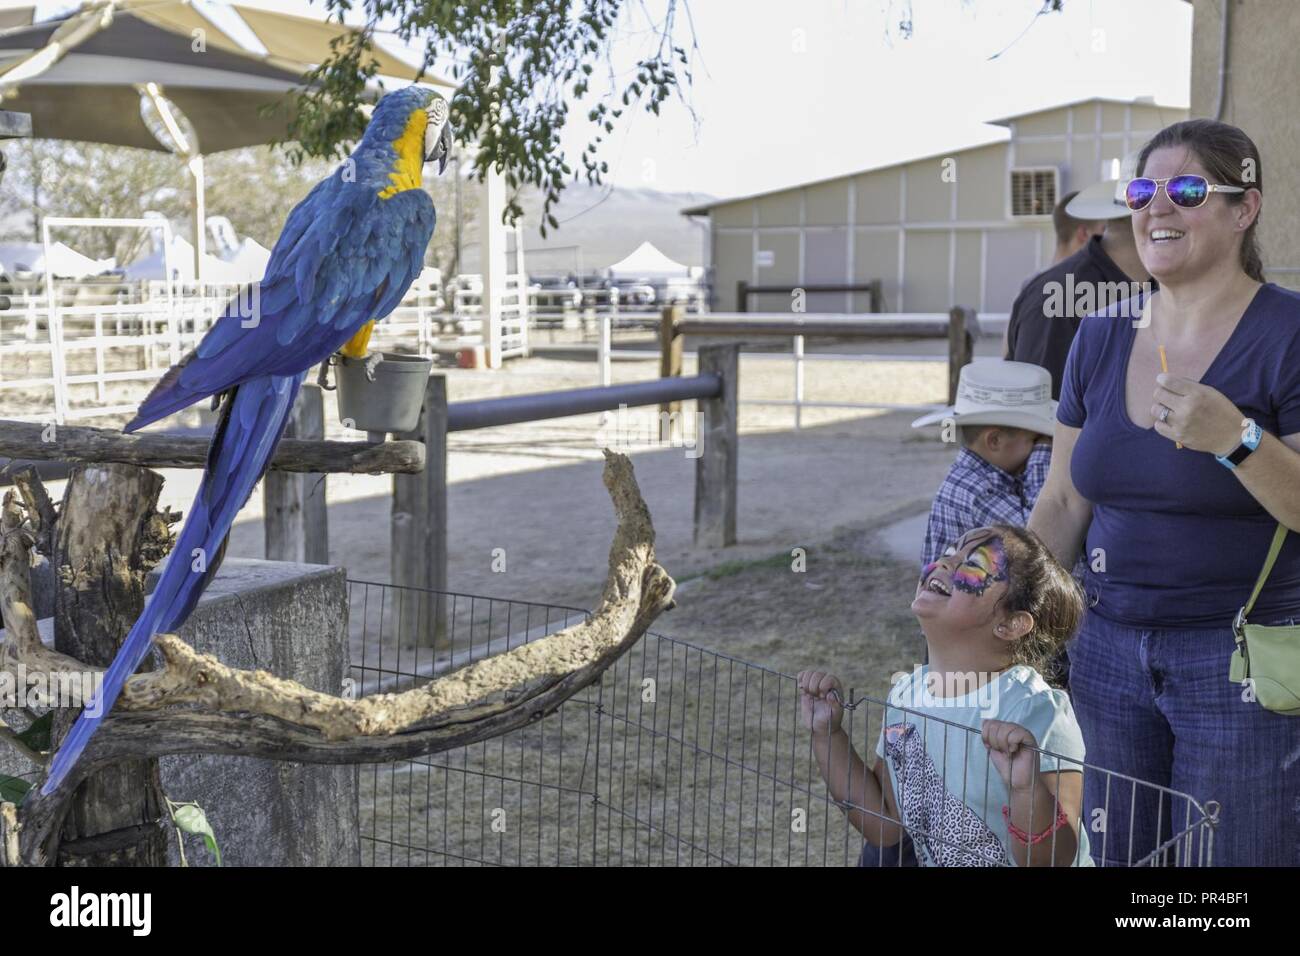 A mother and her daughter cheerfuly view a parrot at the animal exhibit during the carnival prior to the 2018 Extreme Rodeo aboard Marine Corps Logistics Base Barstow, California, Sept. 8. Stock Photo